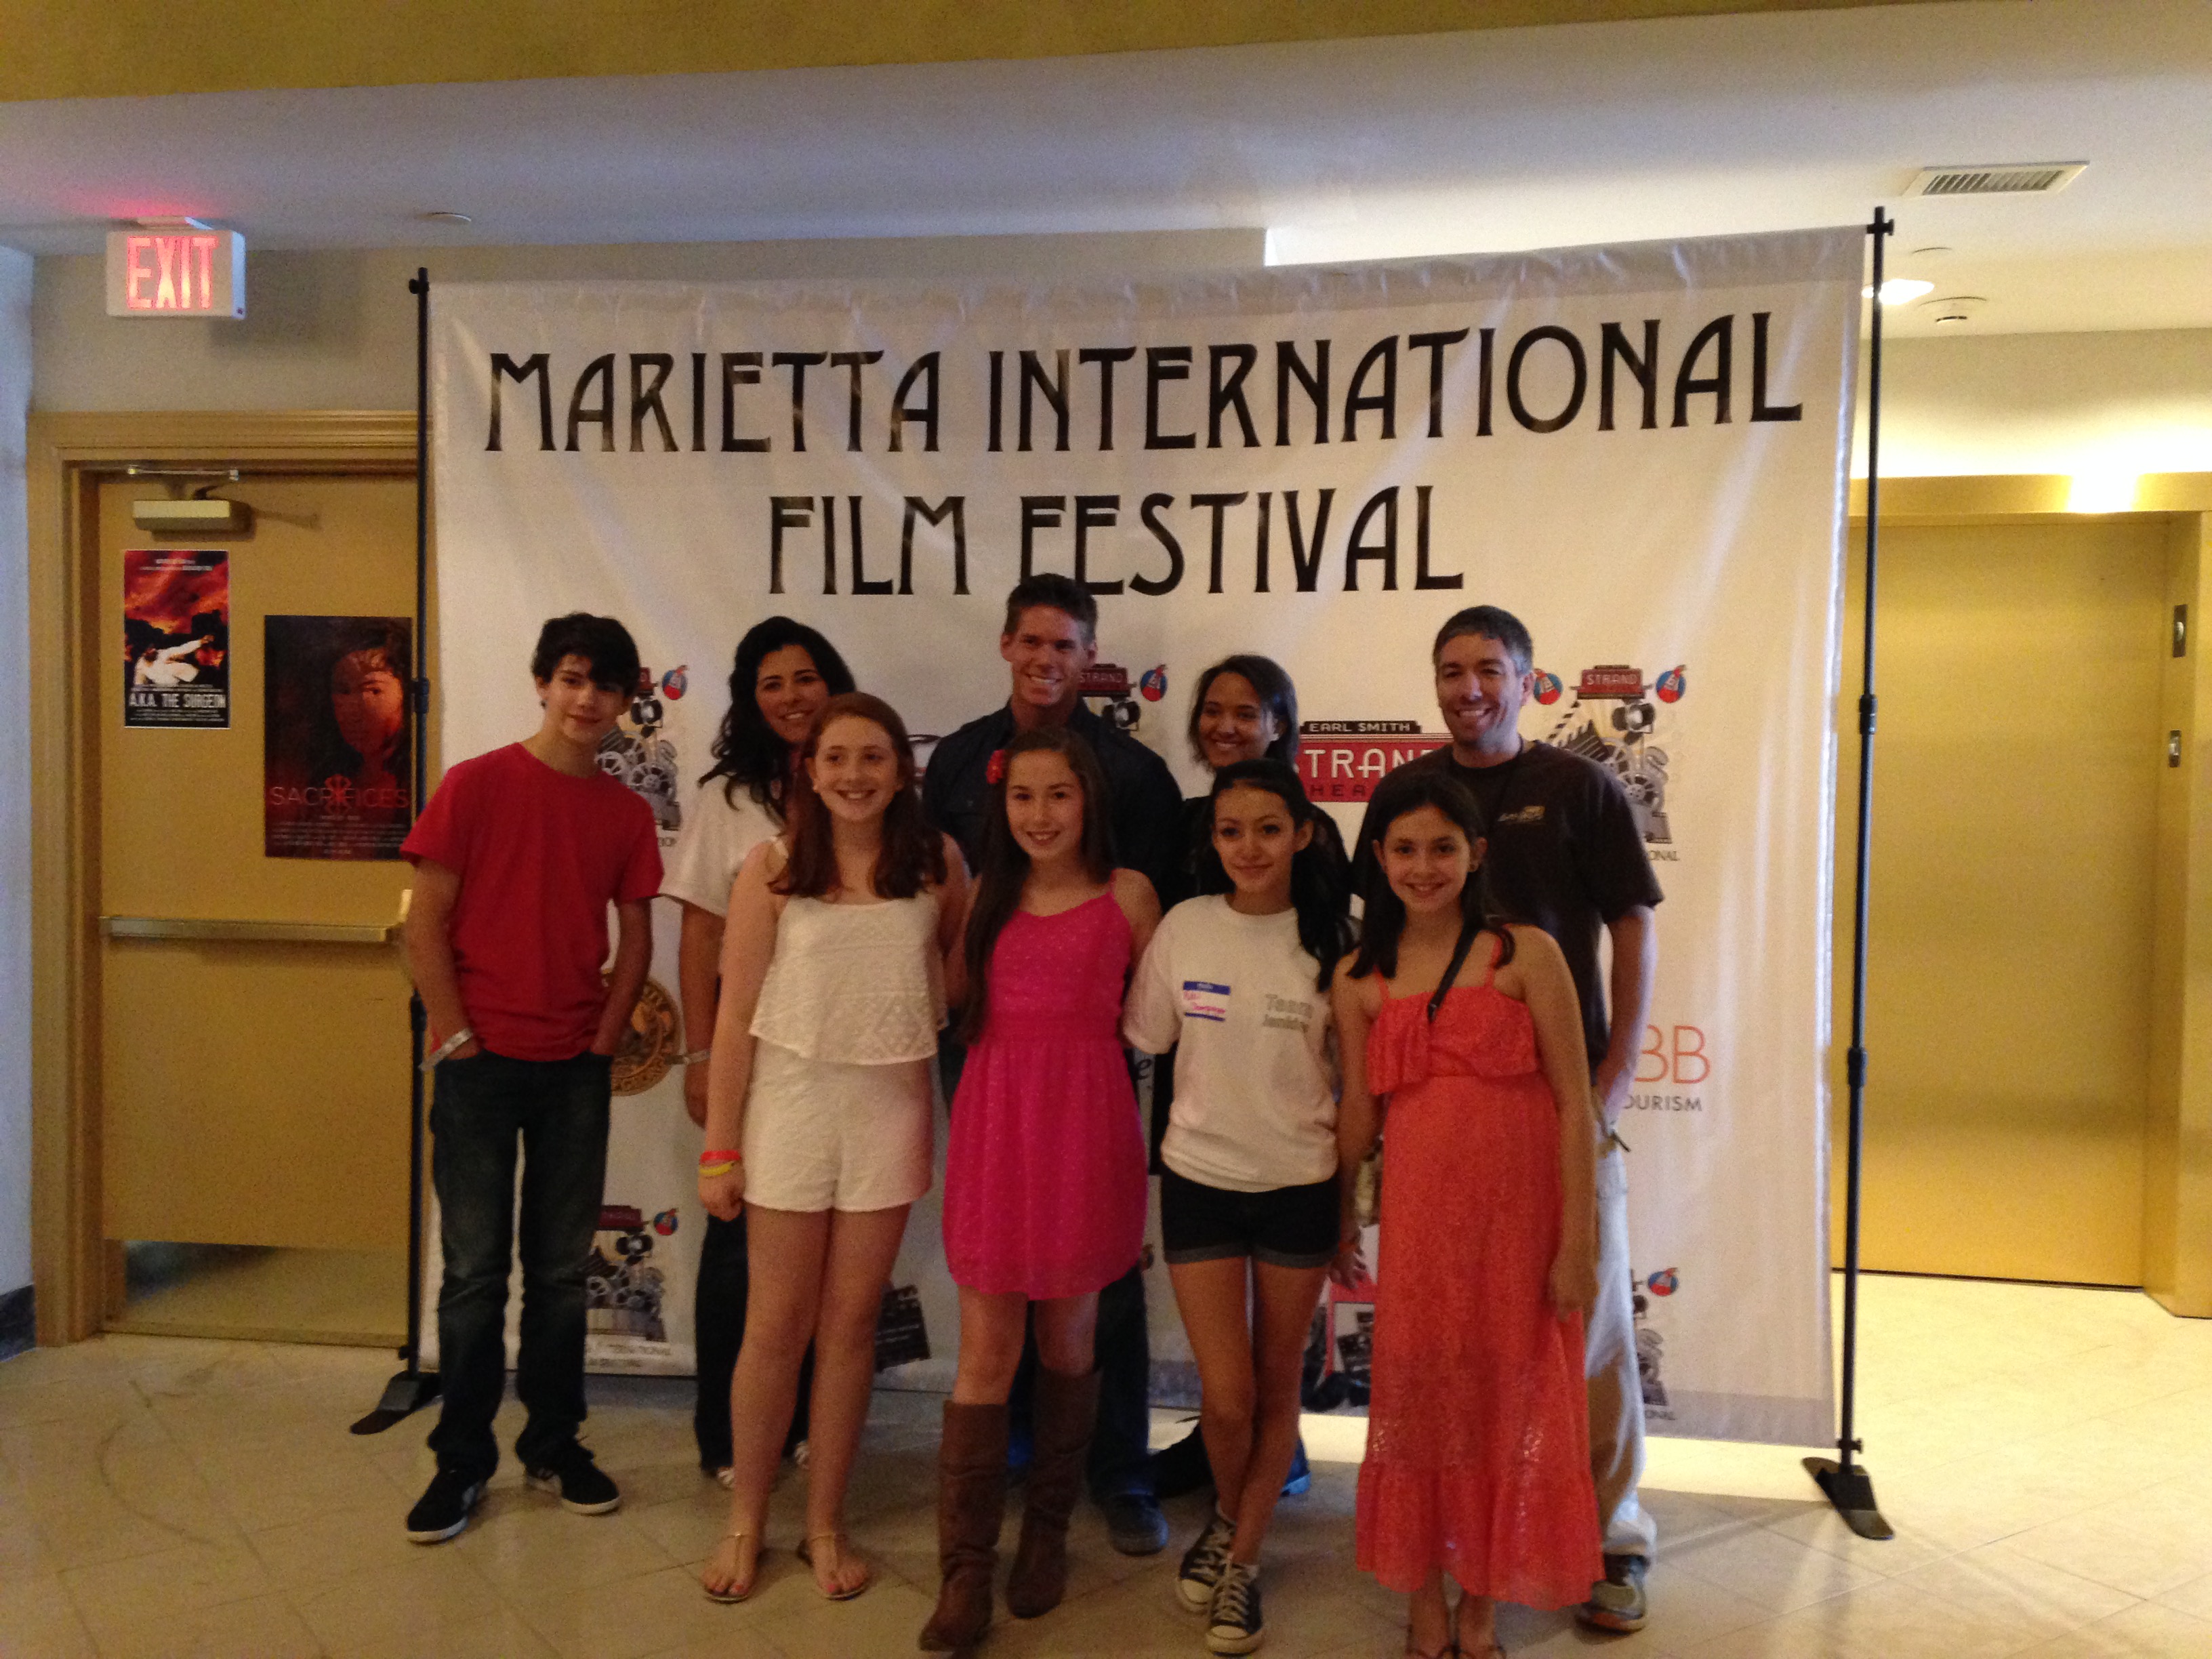 Group picture with the cast and director of 'Sacrifices' at the Marietta International Film Festival 2015.